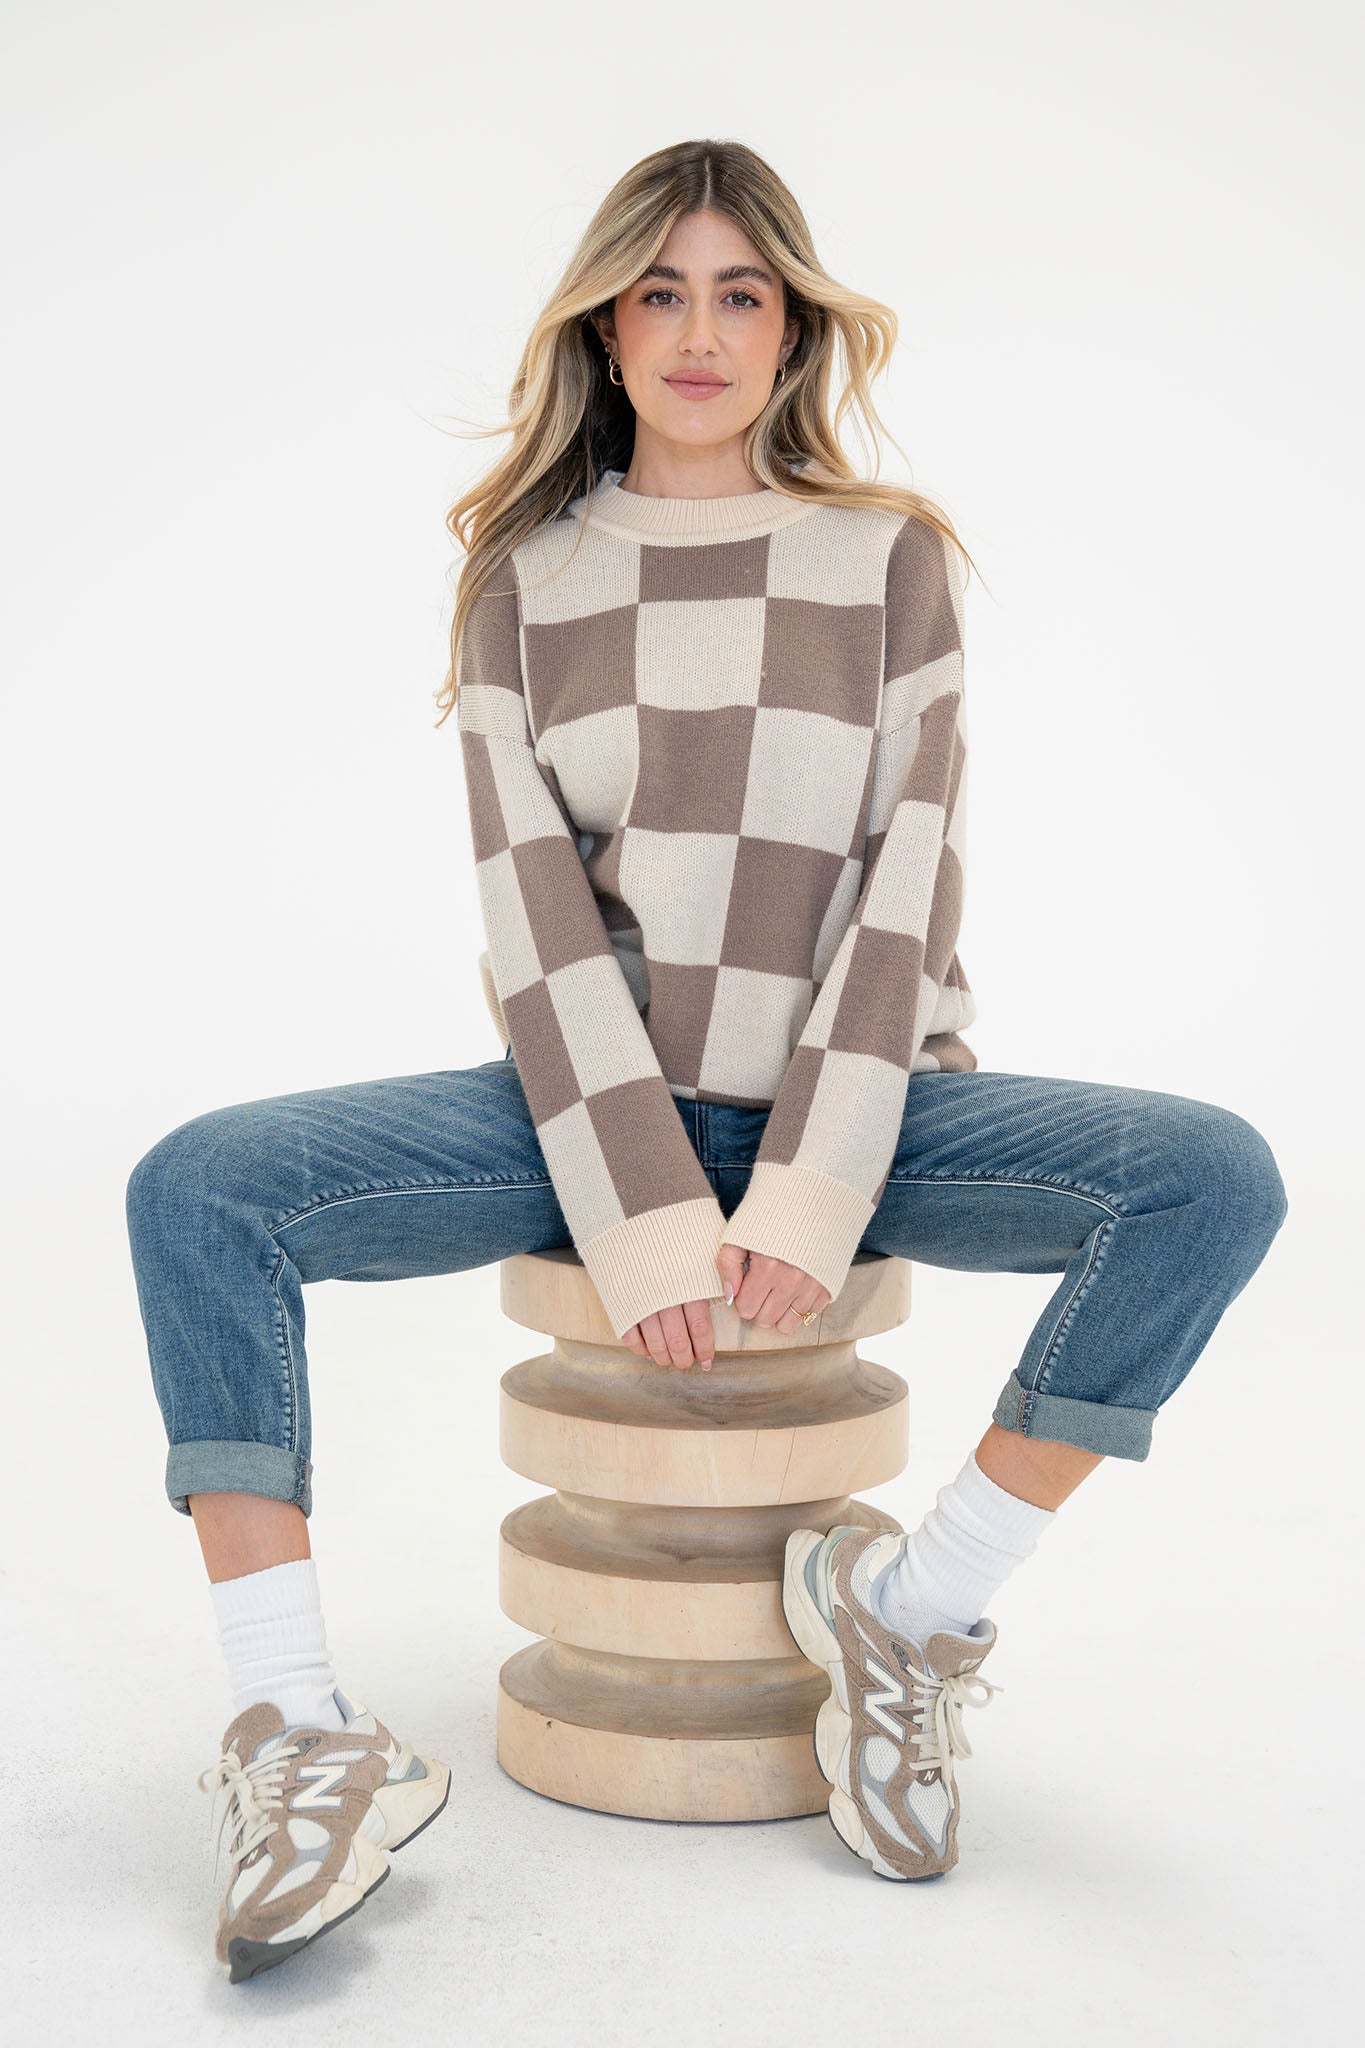 View 1 of Checkered Sweater Top, a nan from Larrea Cove. Detail: Create a on-trend look with our oversized Chec...